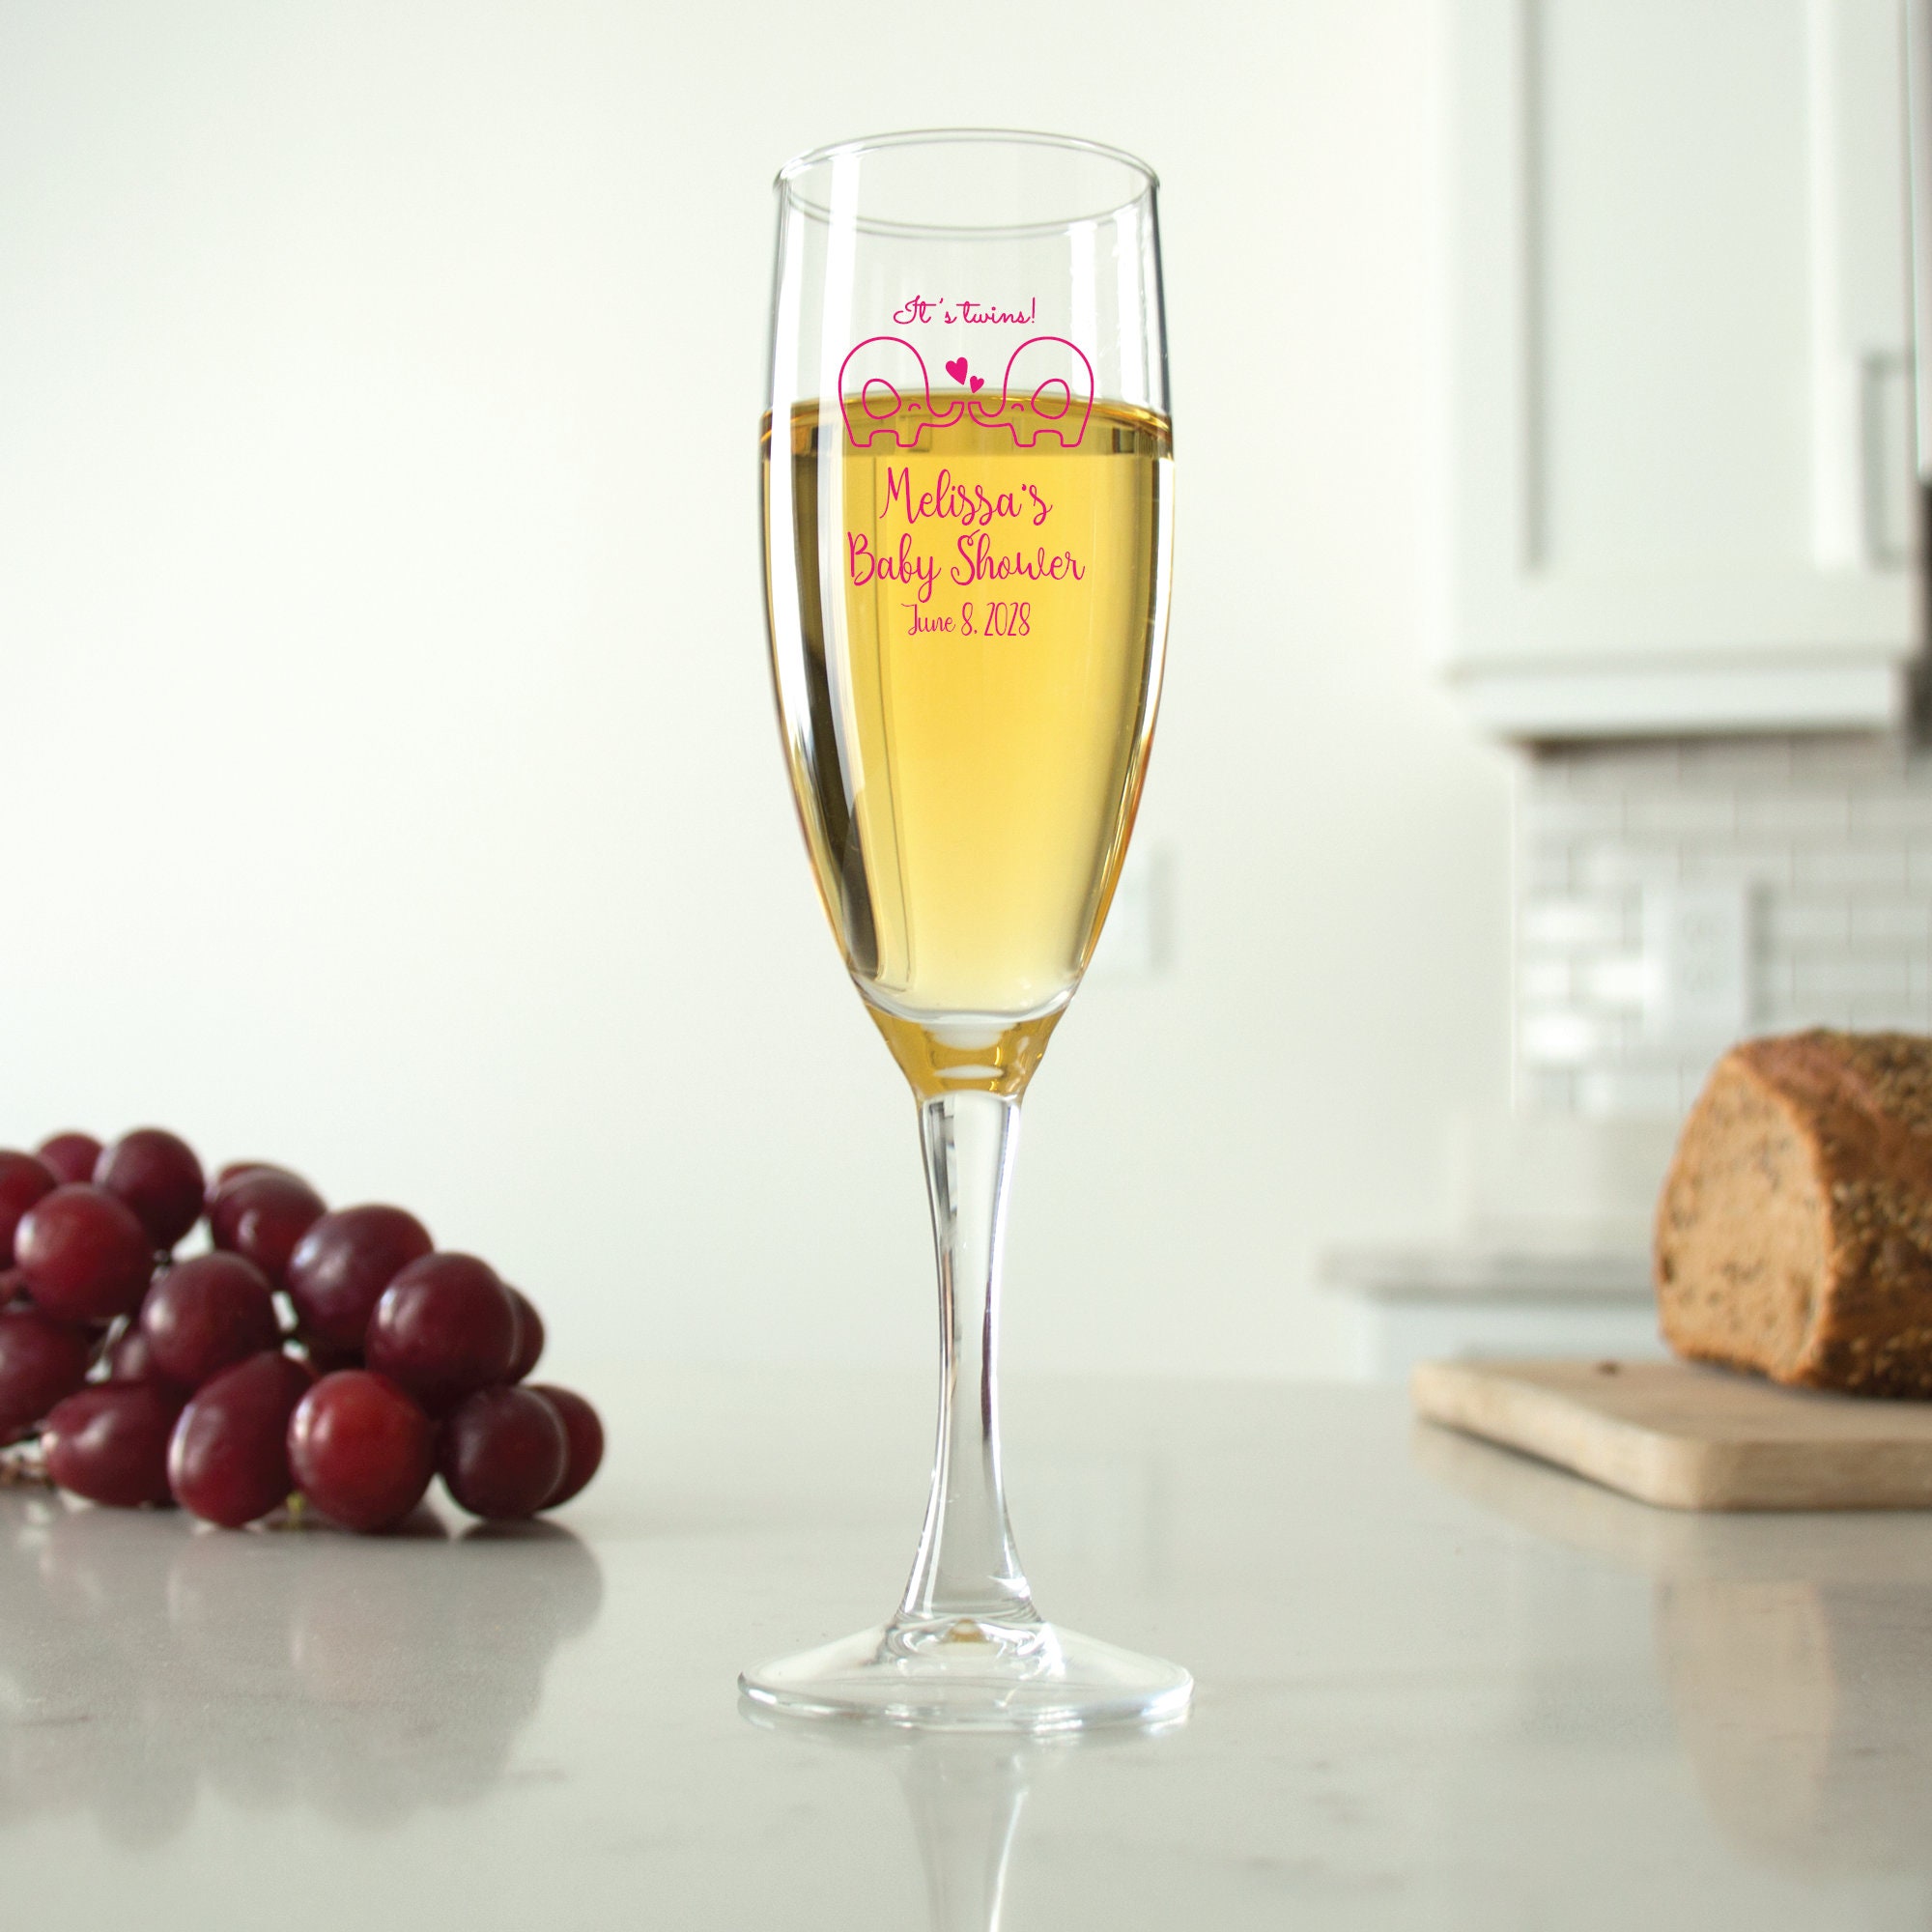 Corporate Engraved Twin Champagne Flutes